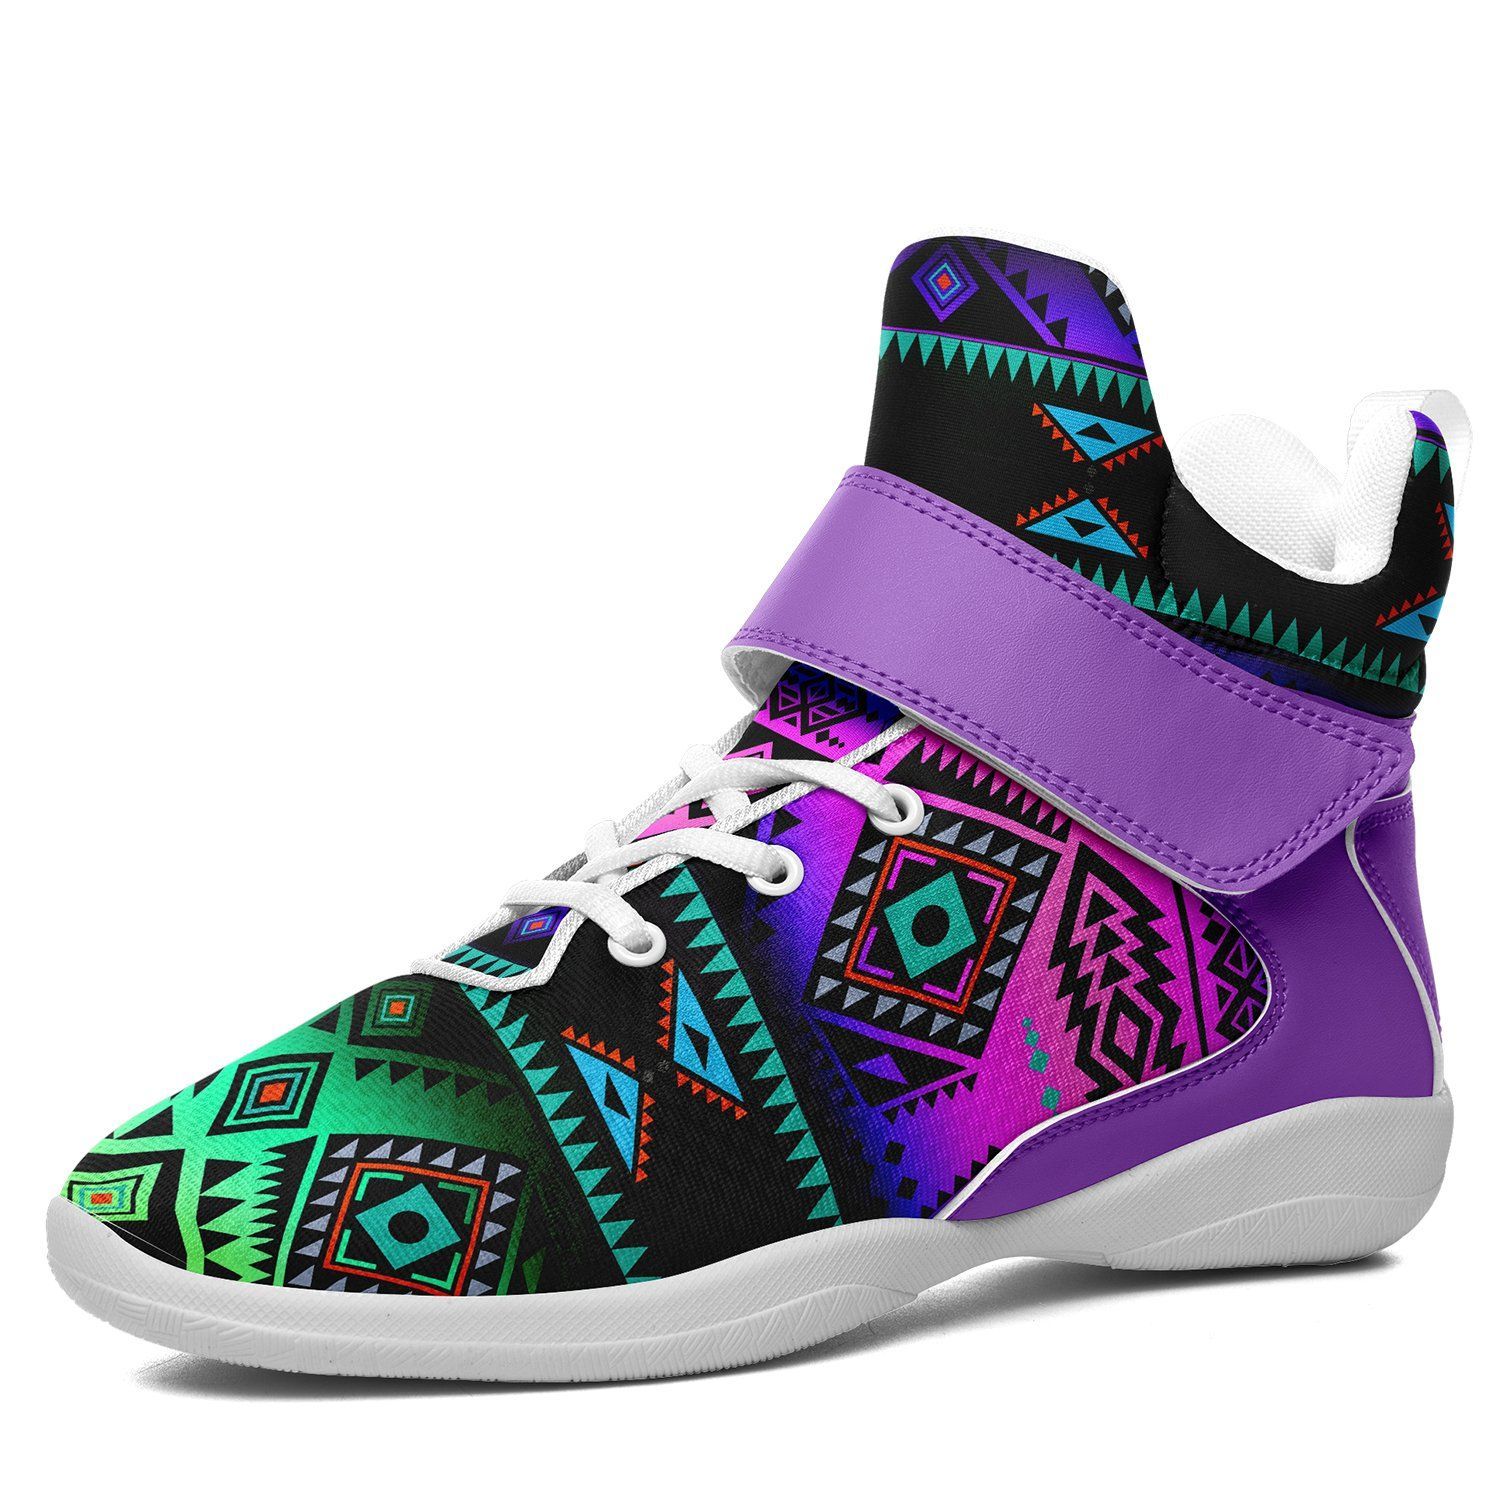 California Coast Sunrise Kid's Ipottaa Basketball / Sport High Top Shoes 49 Dzine US Women 4.5 / US Youth 3.5 / EUR 35 White Sole with Lavender Strap 